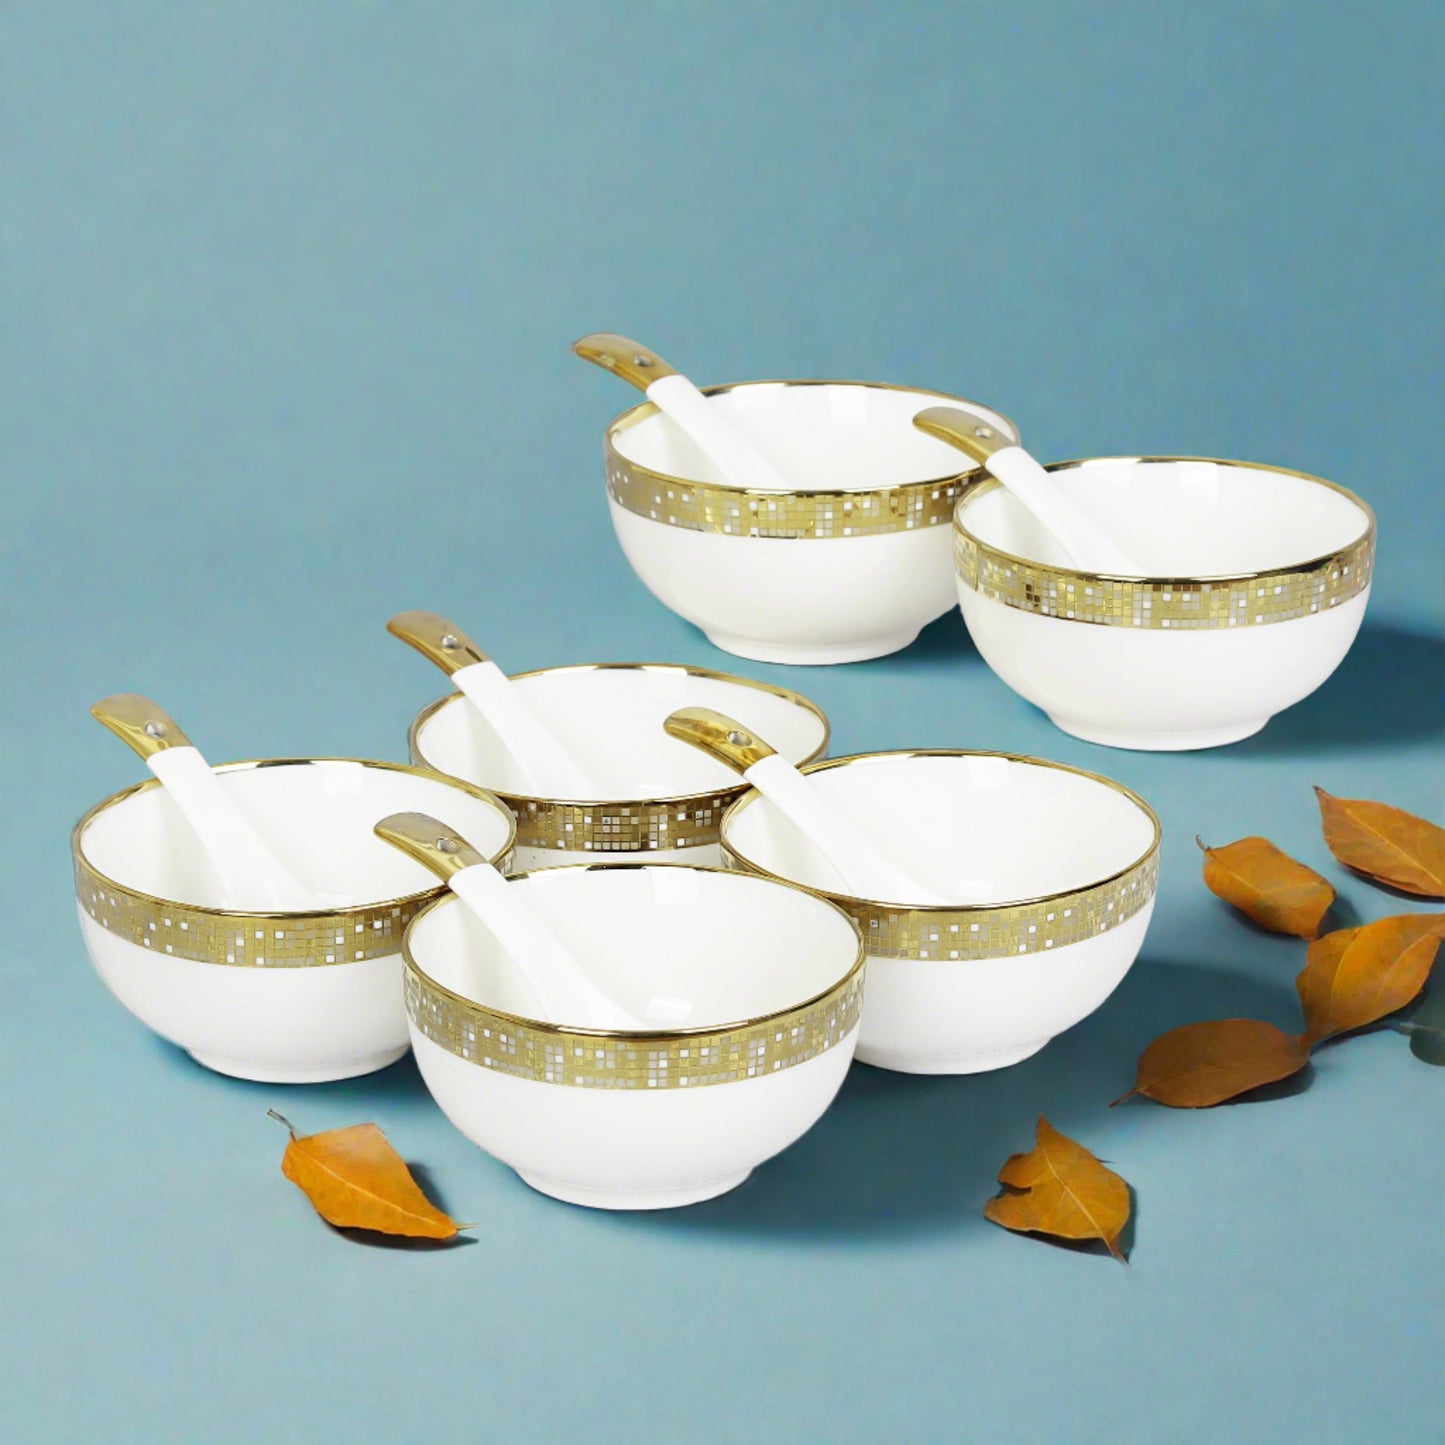 Set of 6 ceramic soup bowls with matching spoons - perfect for delightful soup servings